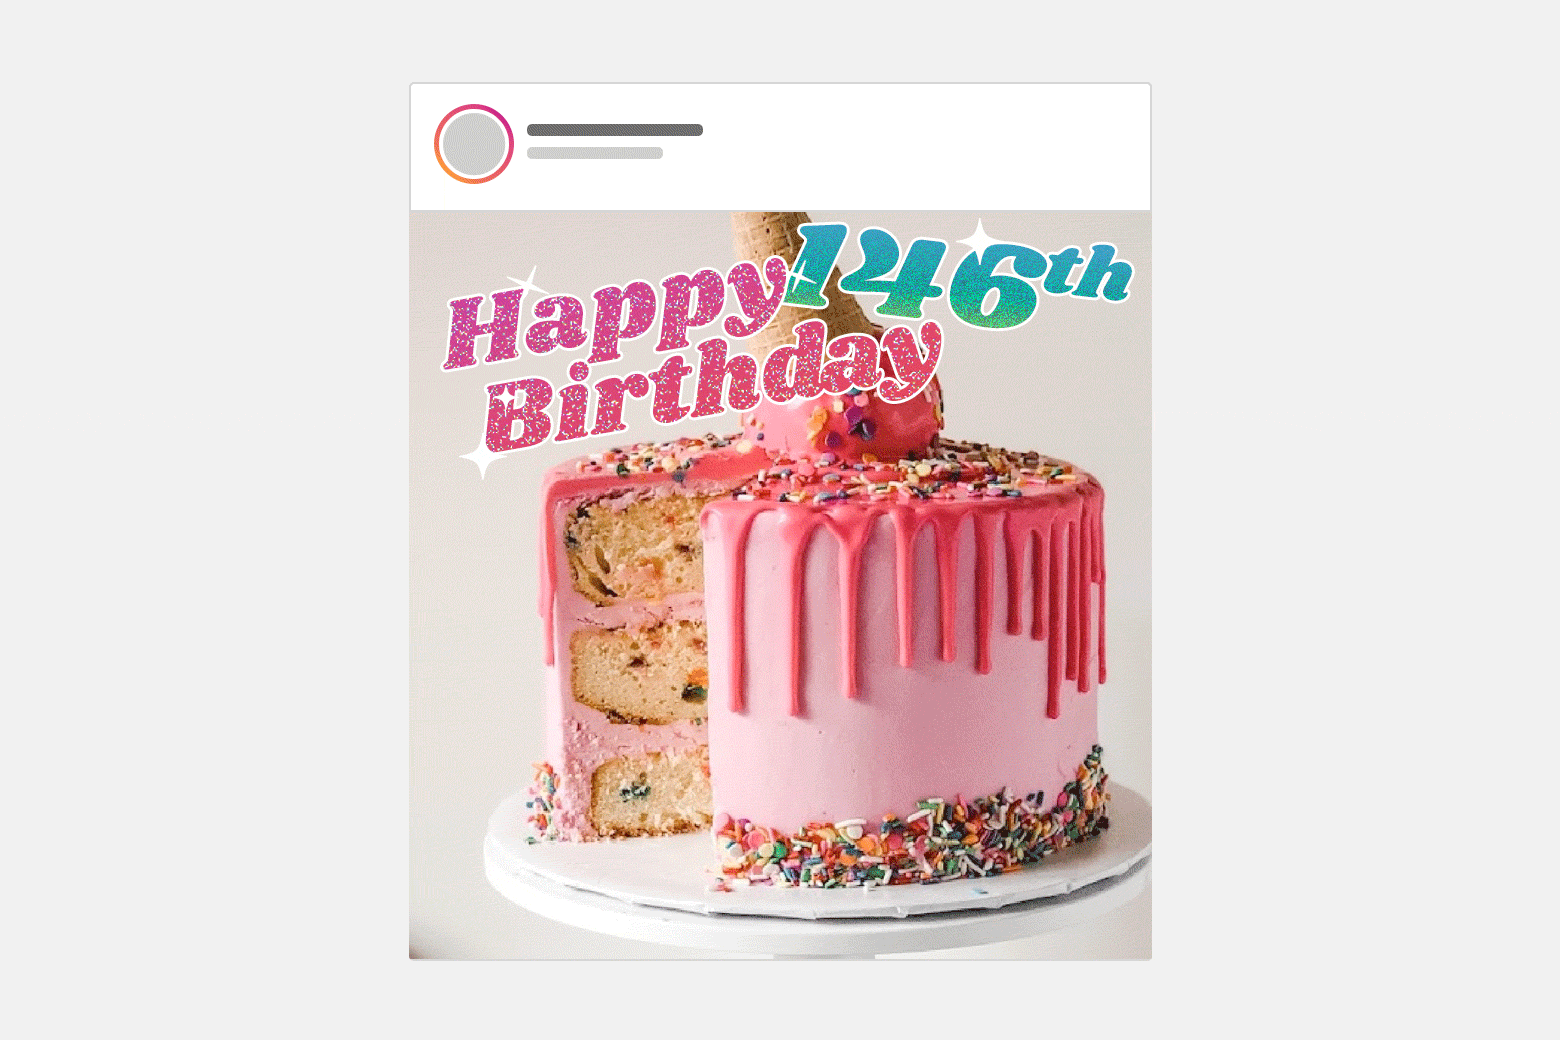 A birthday cake with sparkly words saying "Happy 146th Birthday!" in a fake Instagram post.